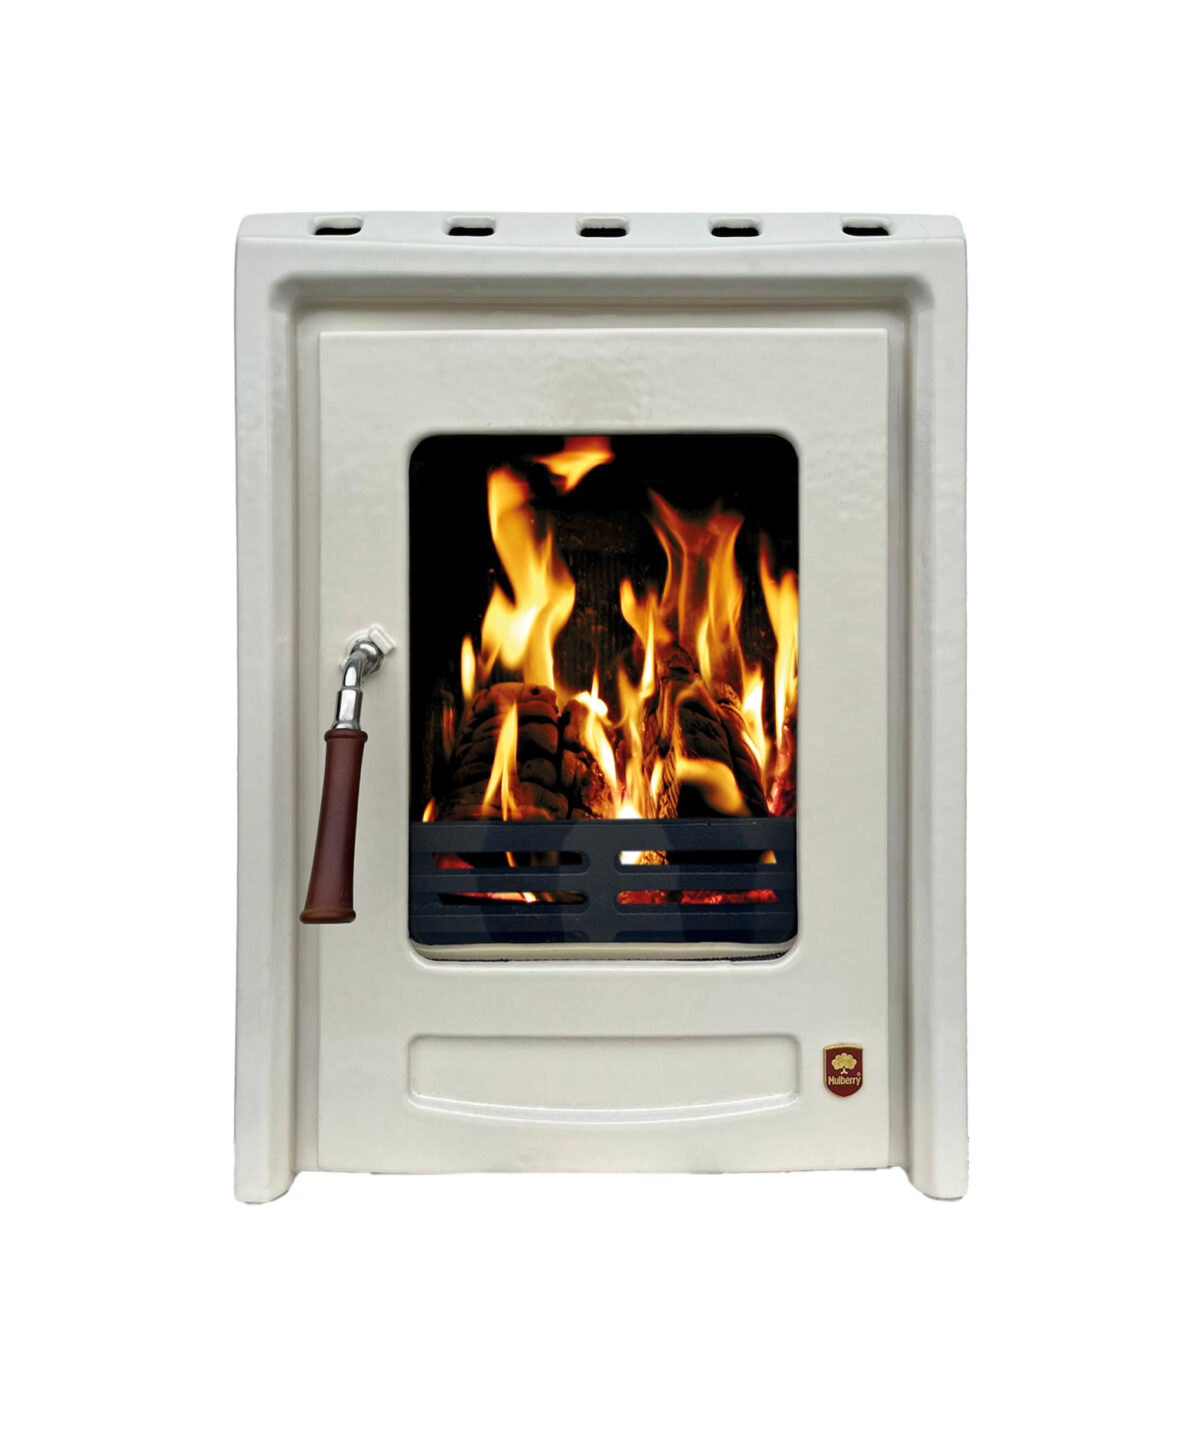 Shaw 5KW Insert Solid Fuel Stove